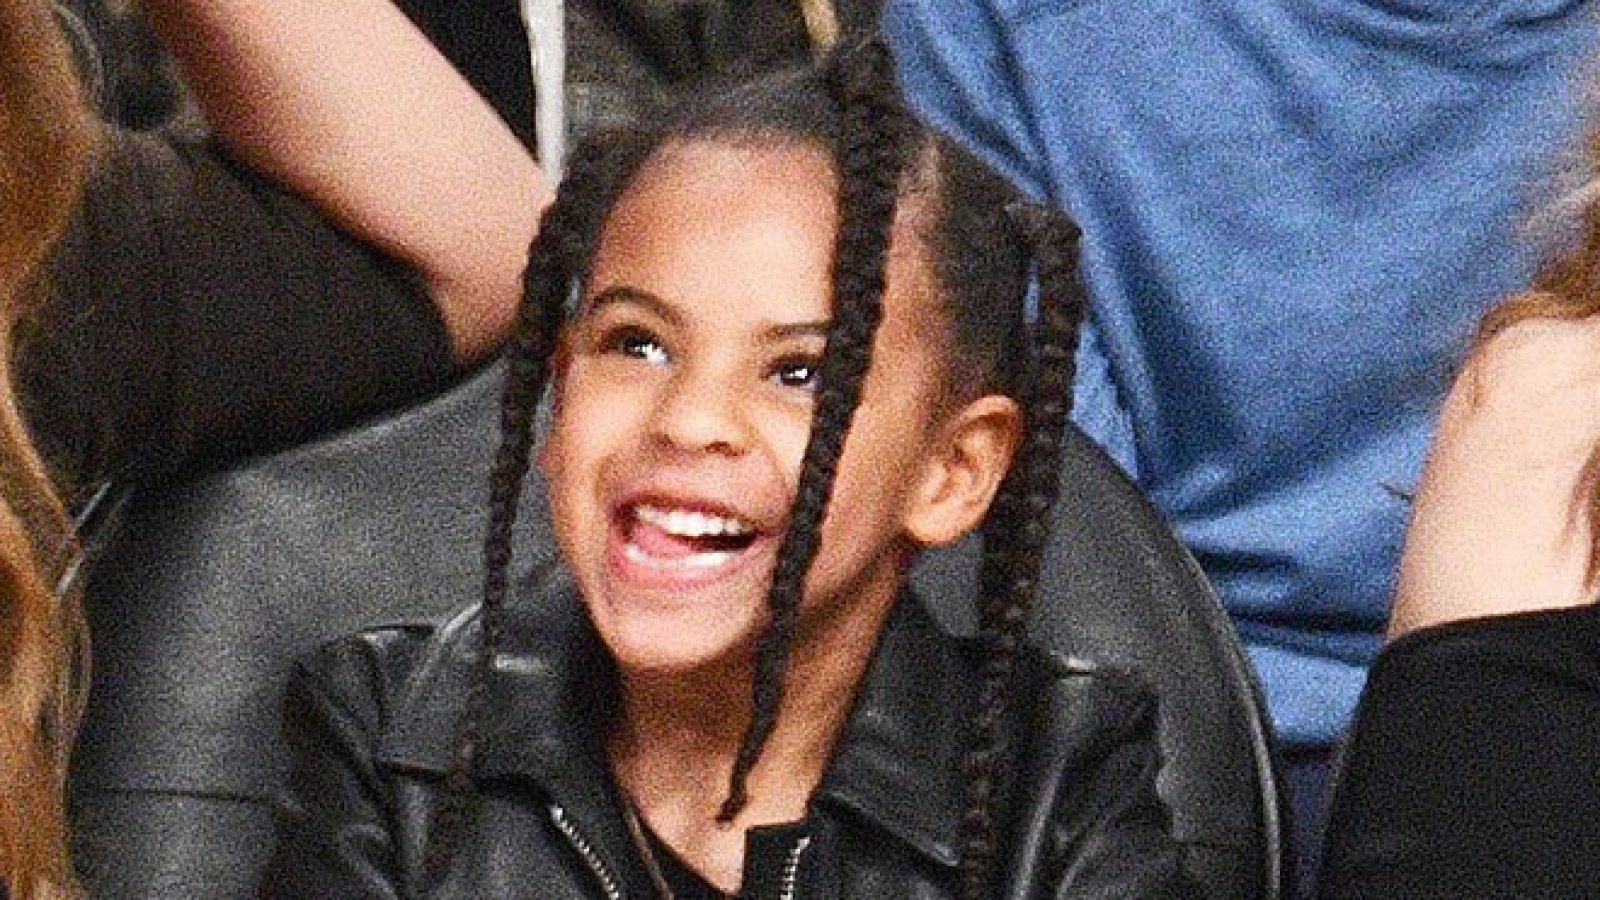 Blue Ivy Carter Wins NAACP Image Award at Age 8 for 'Brown Skin